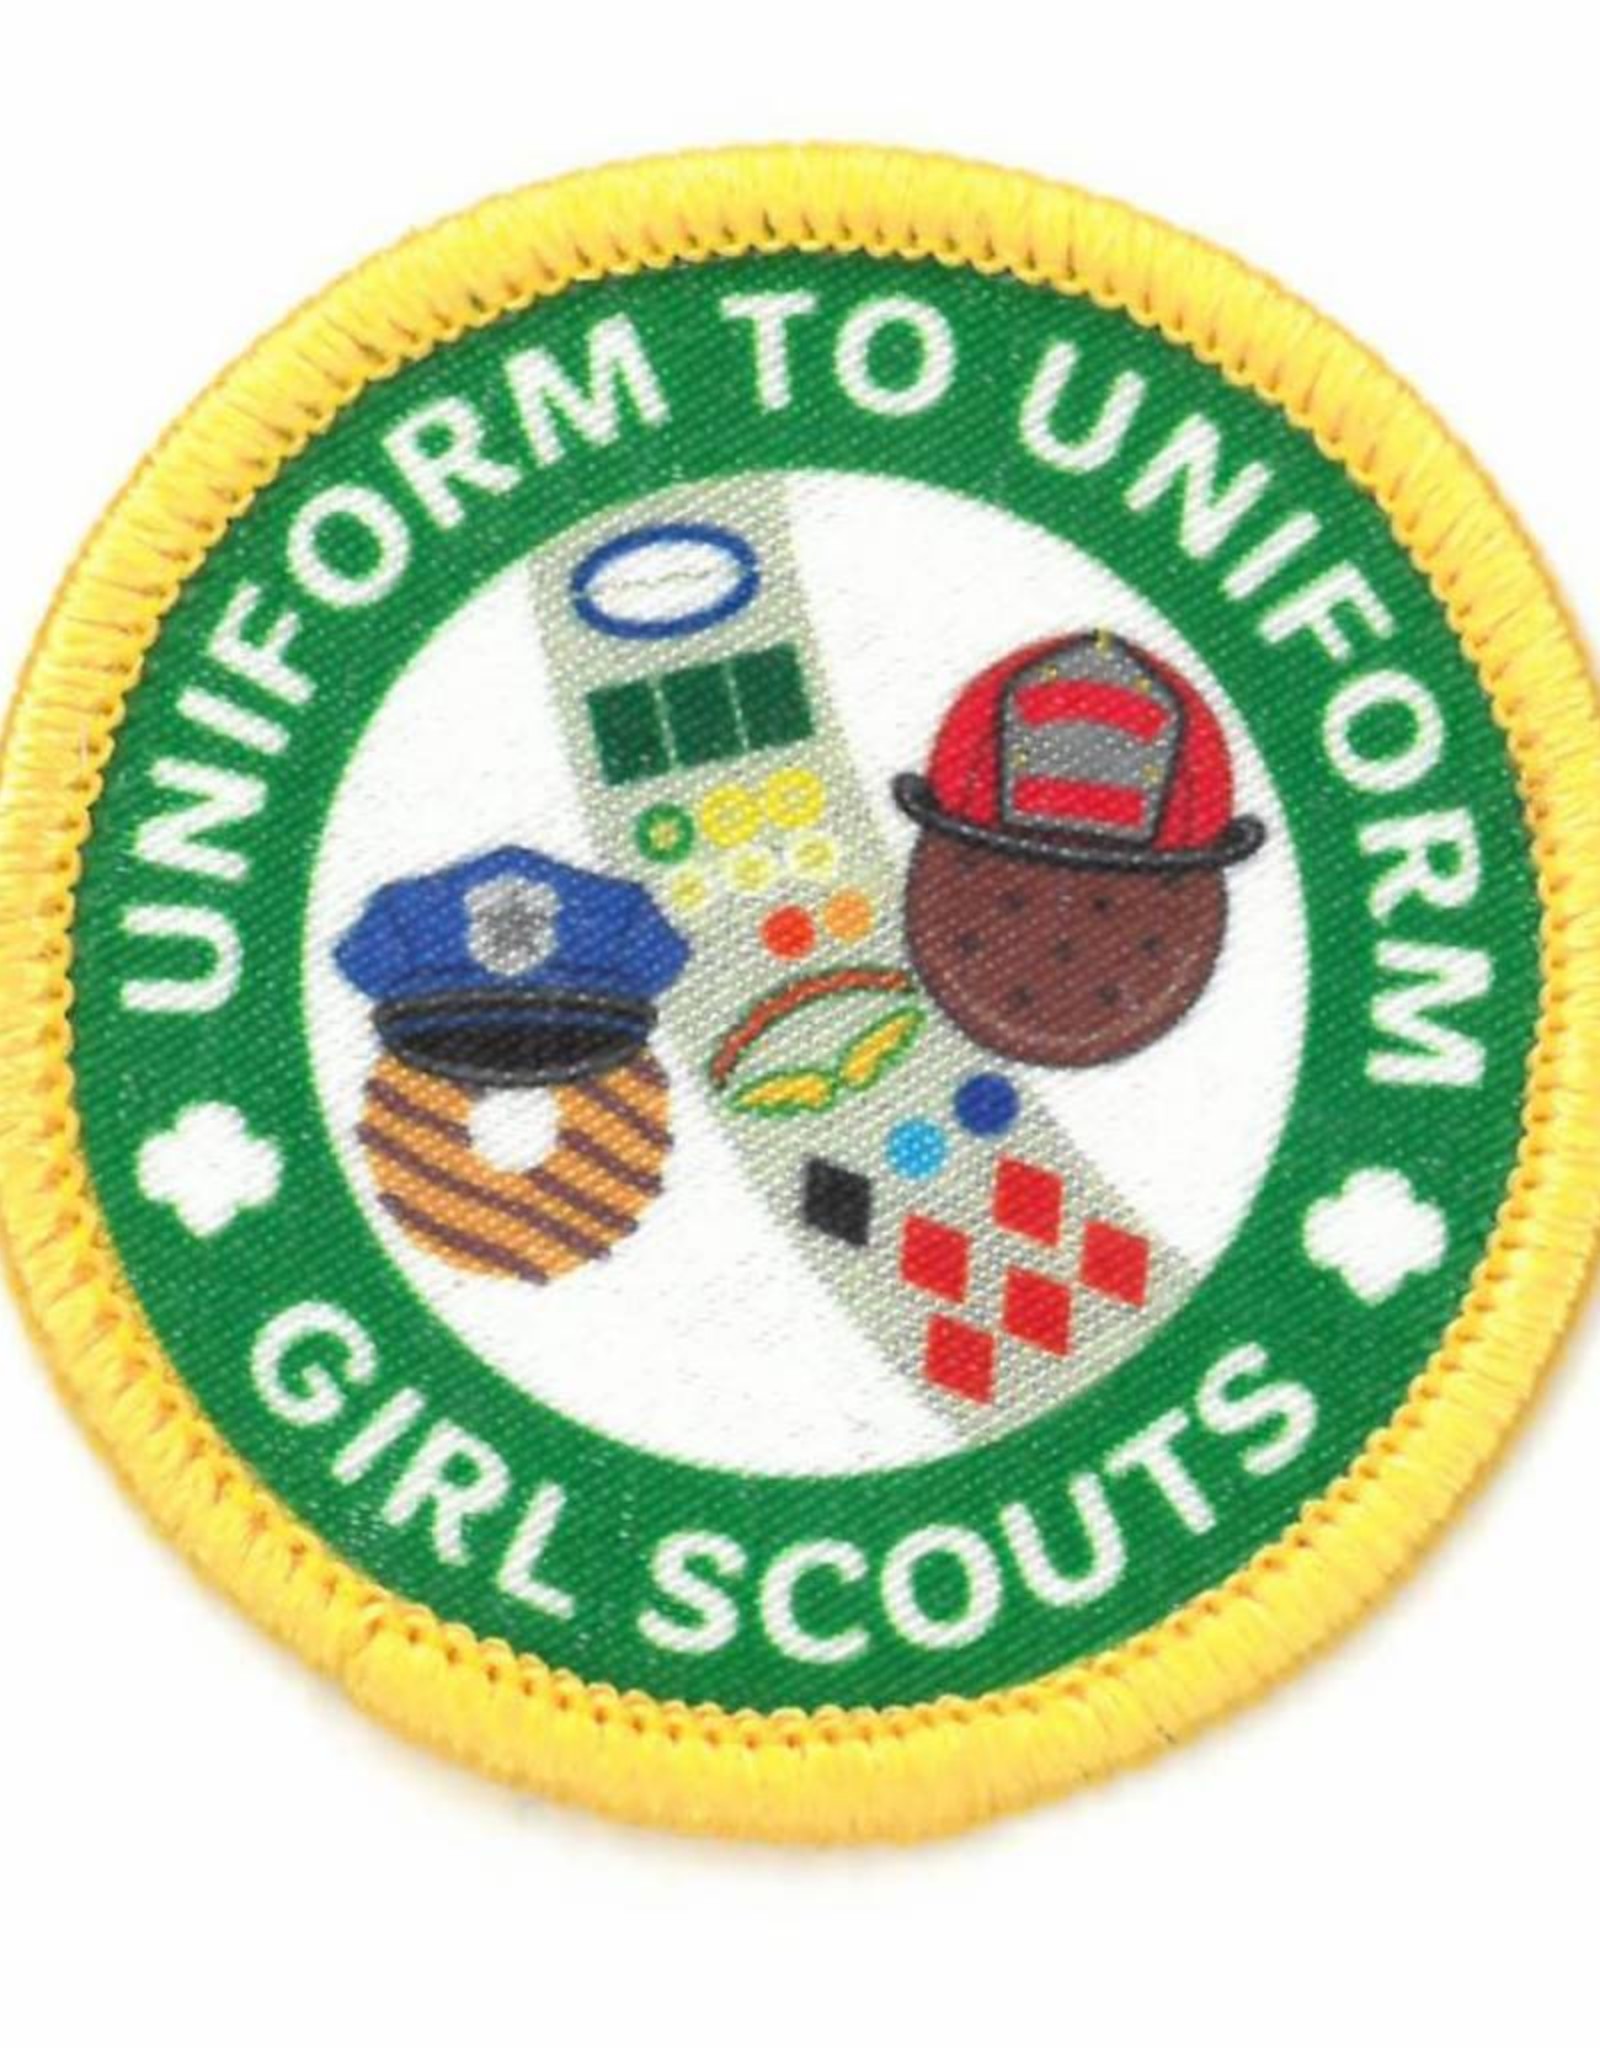 GIRL SCOUTS OF THE USA *Uniform to Uniform First Responder Cookie Patch